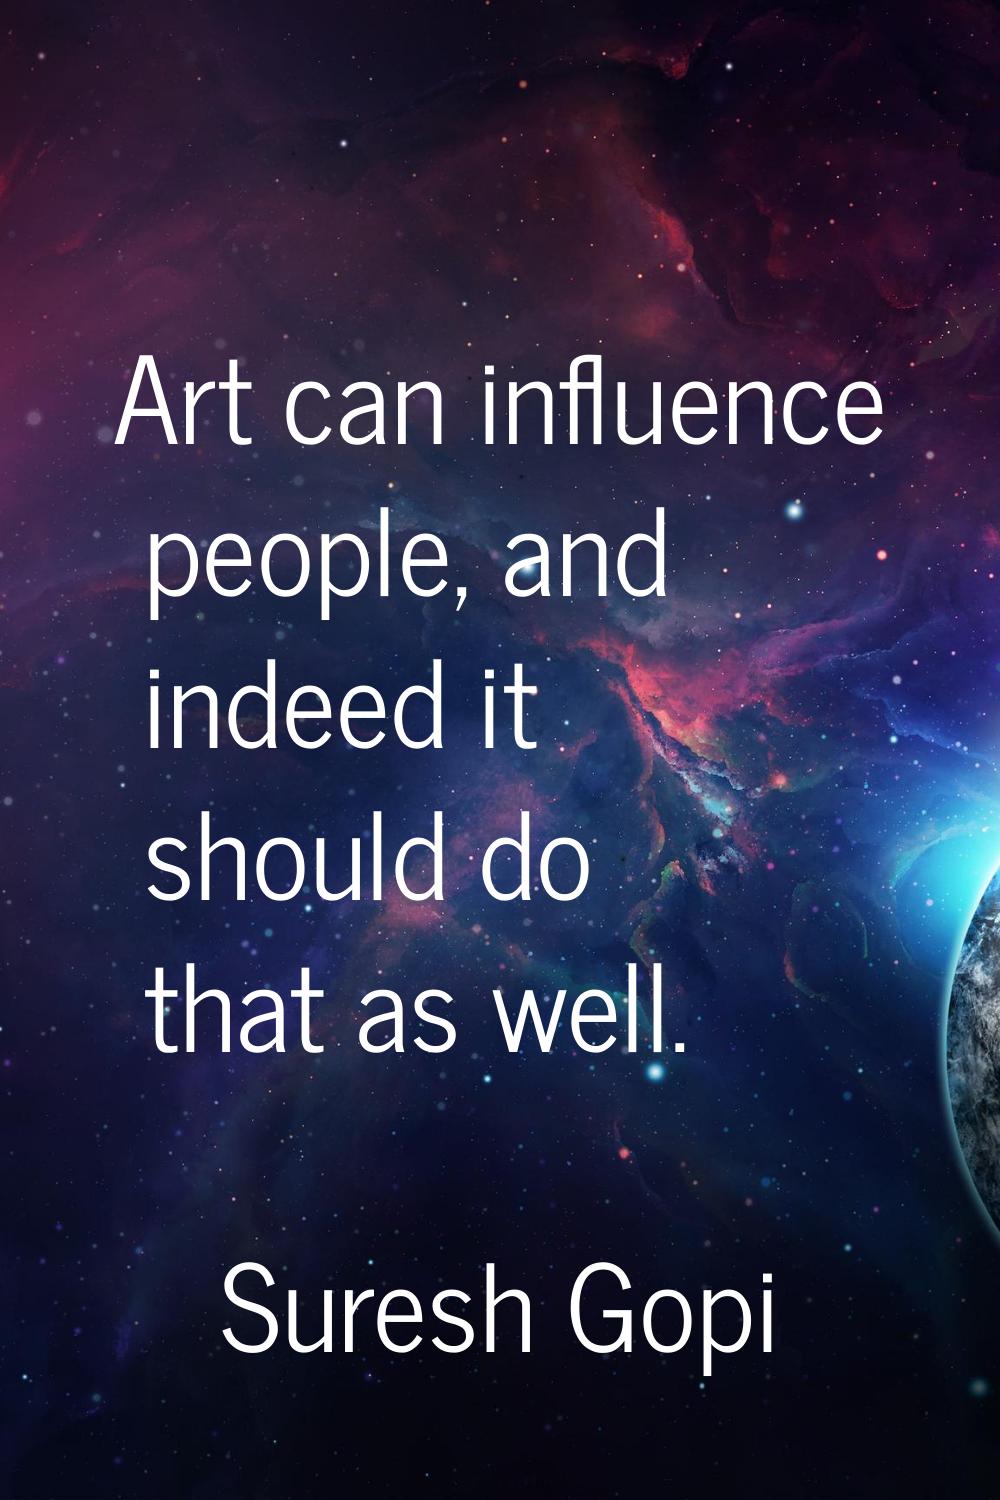 Art can influence people, and indeed it should do that as well.